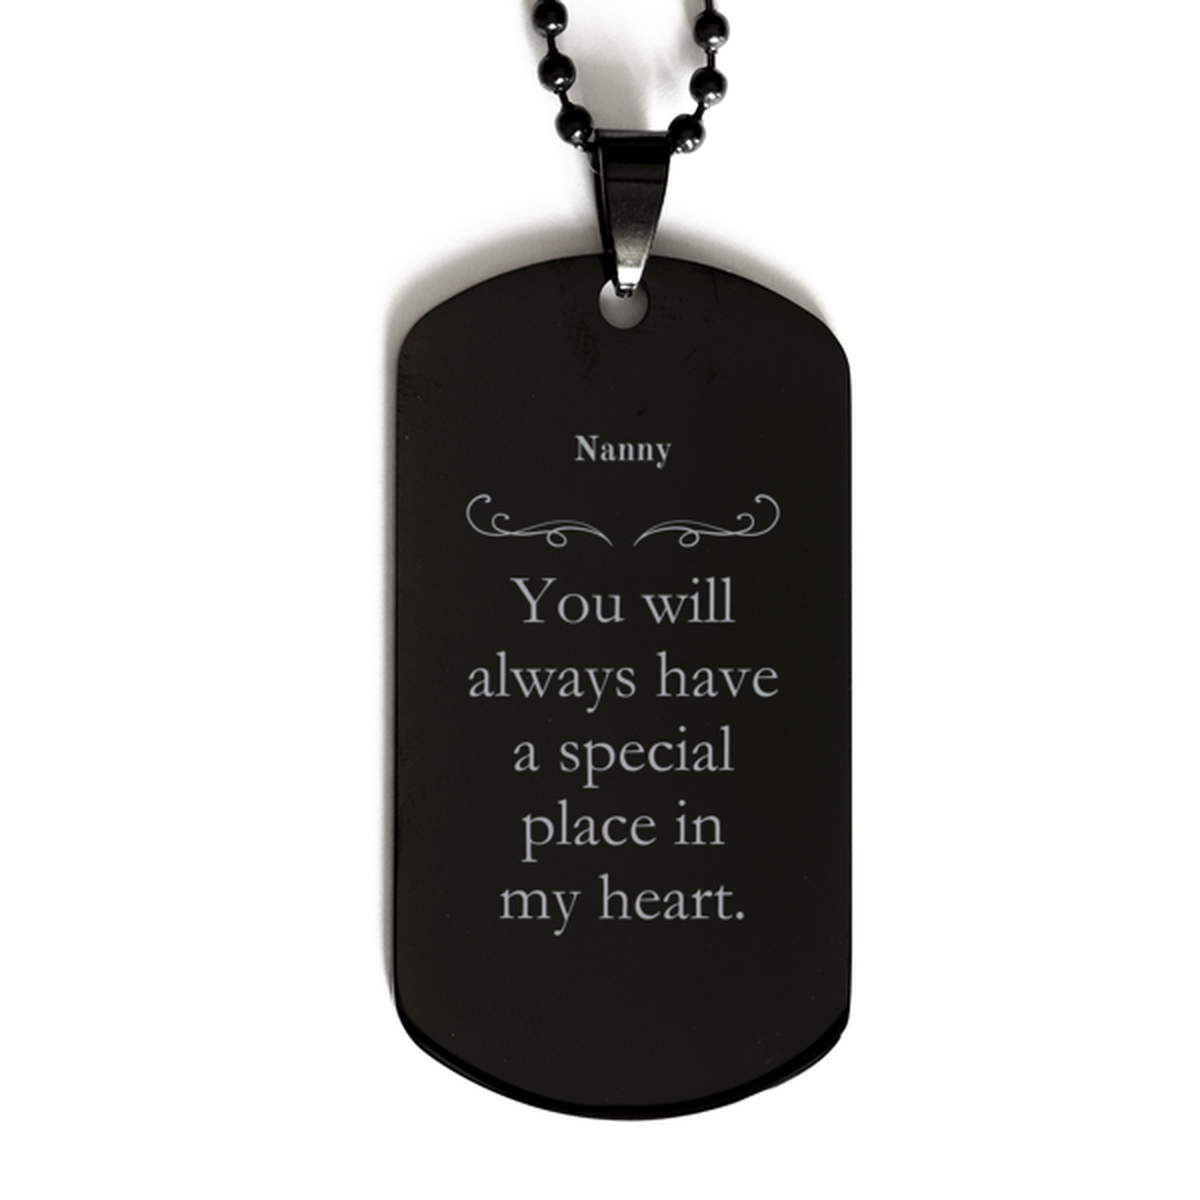 Engraved Black Dog Tag Nanny Special Place in My Heart Gift for Her Birthday Christmas Veterans Day